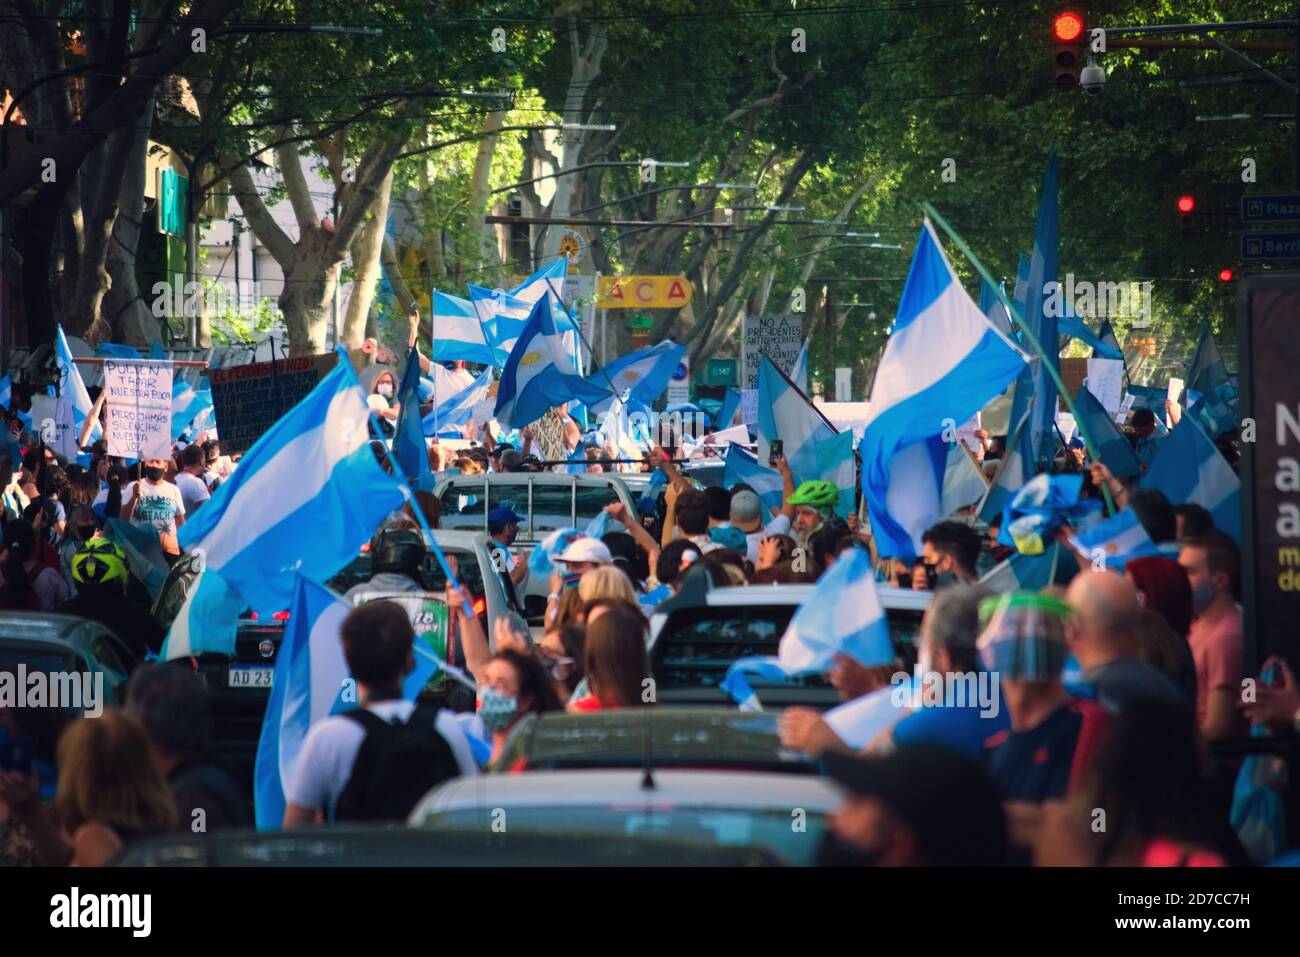 2020-10-12, Mendoza, Argentina: Crowd protesting in the streets against the economic and political measures of president Alberto Fernandez. Stock Photo